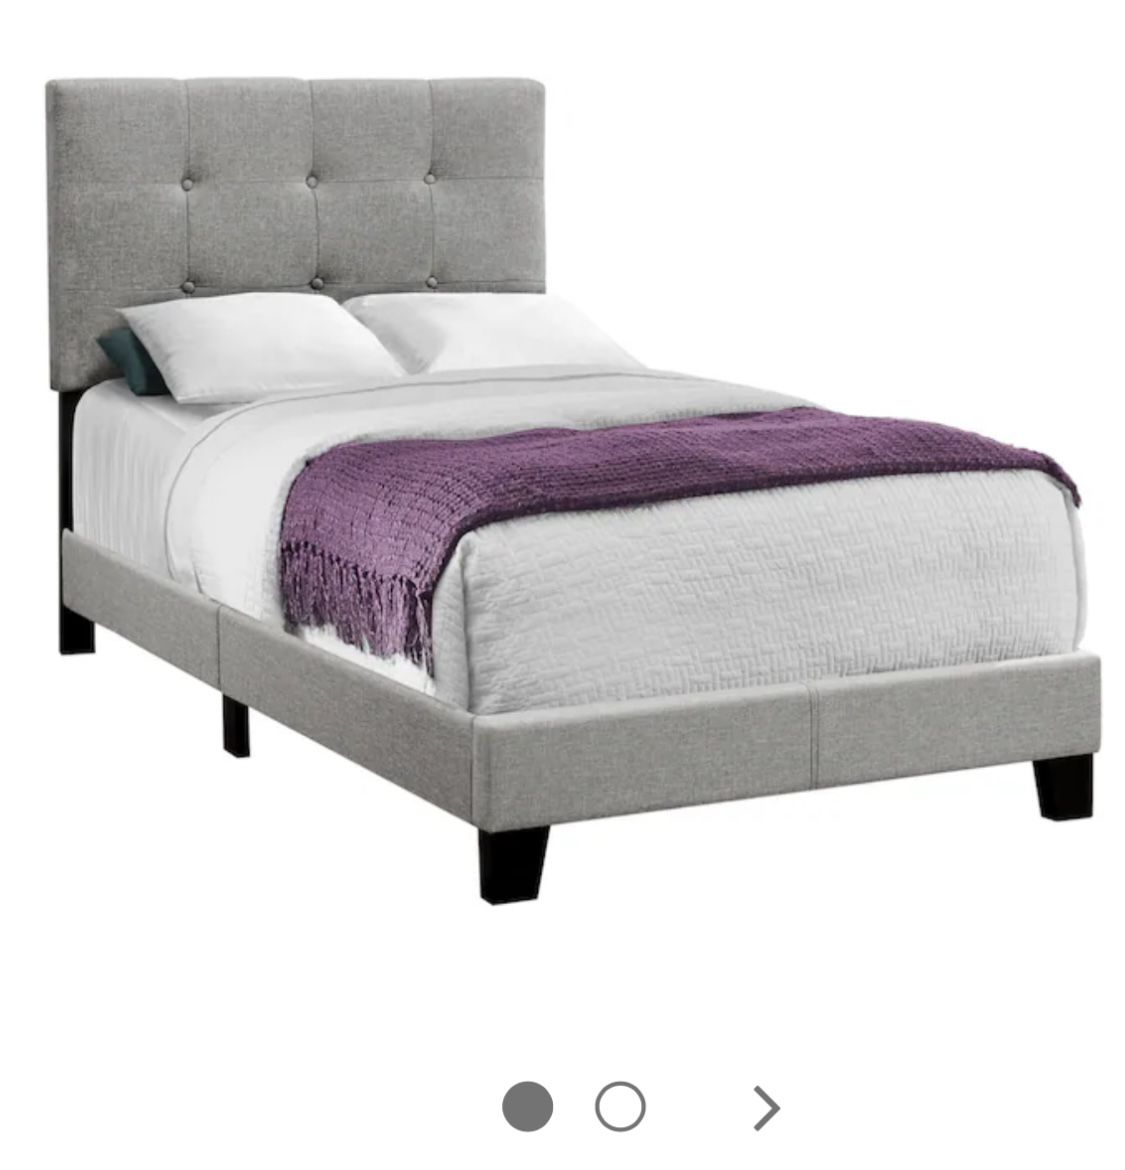 Upholstered Bed XL Twin